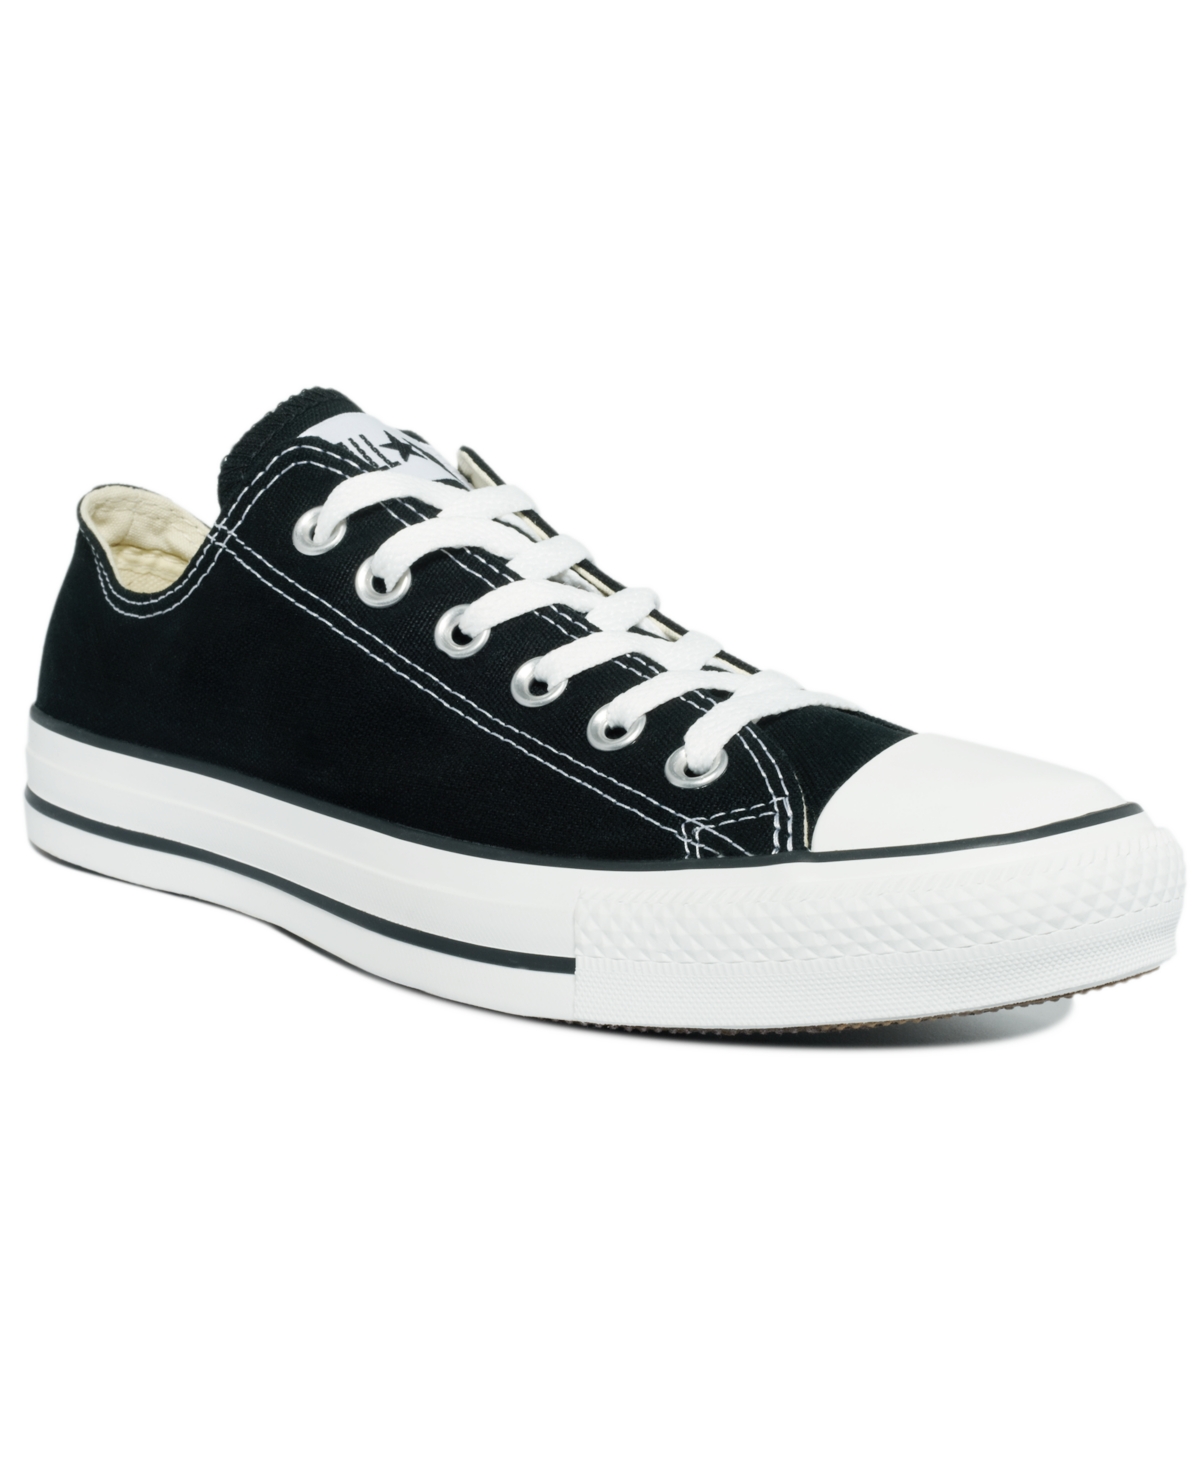 UPC 022859473101 product image for Converse Men's Chuck Taylor Low Top Sneakers from Finish Line | upcitemdb.com